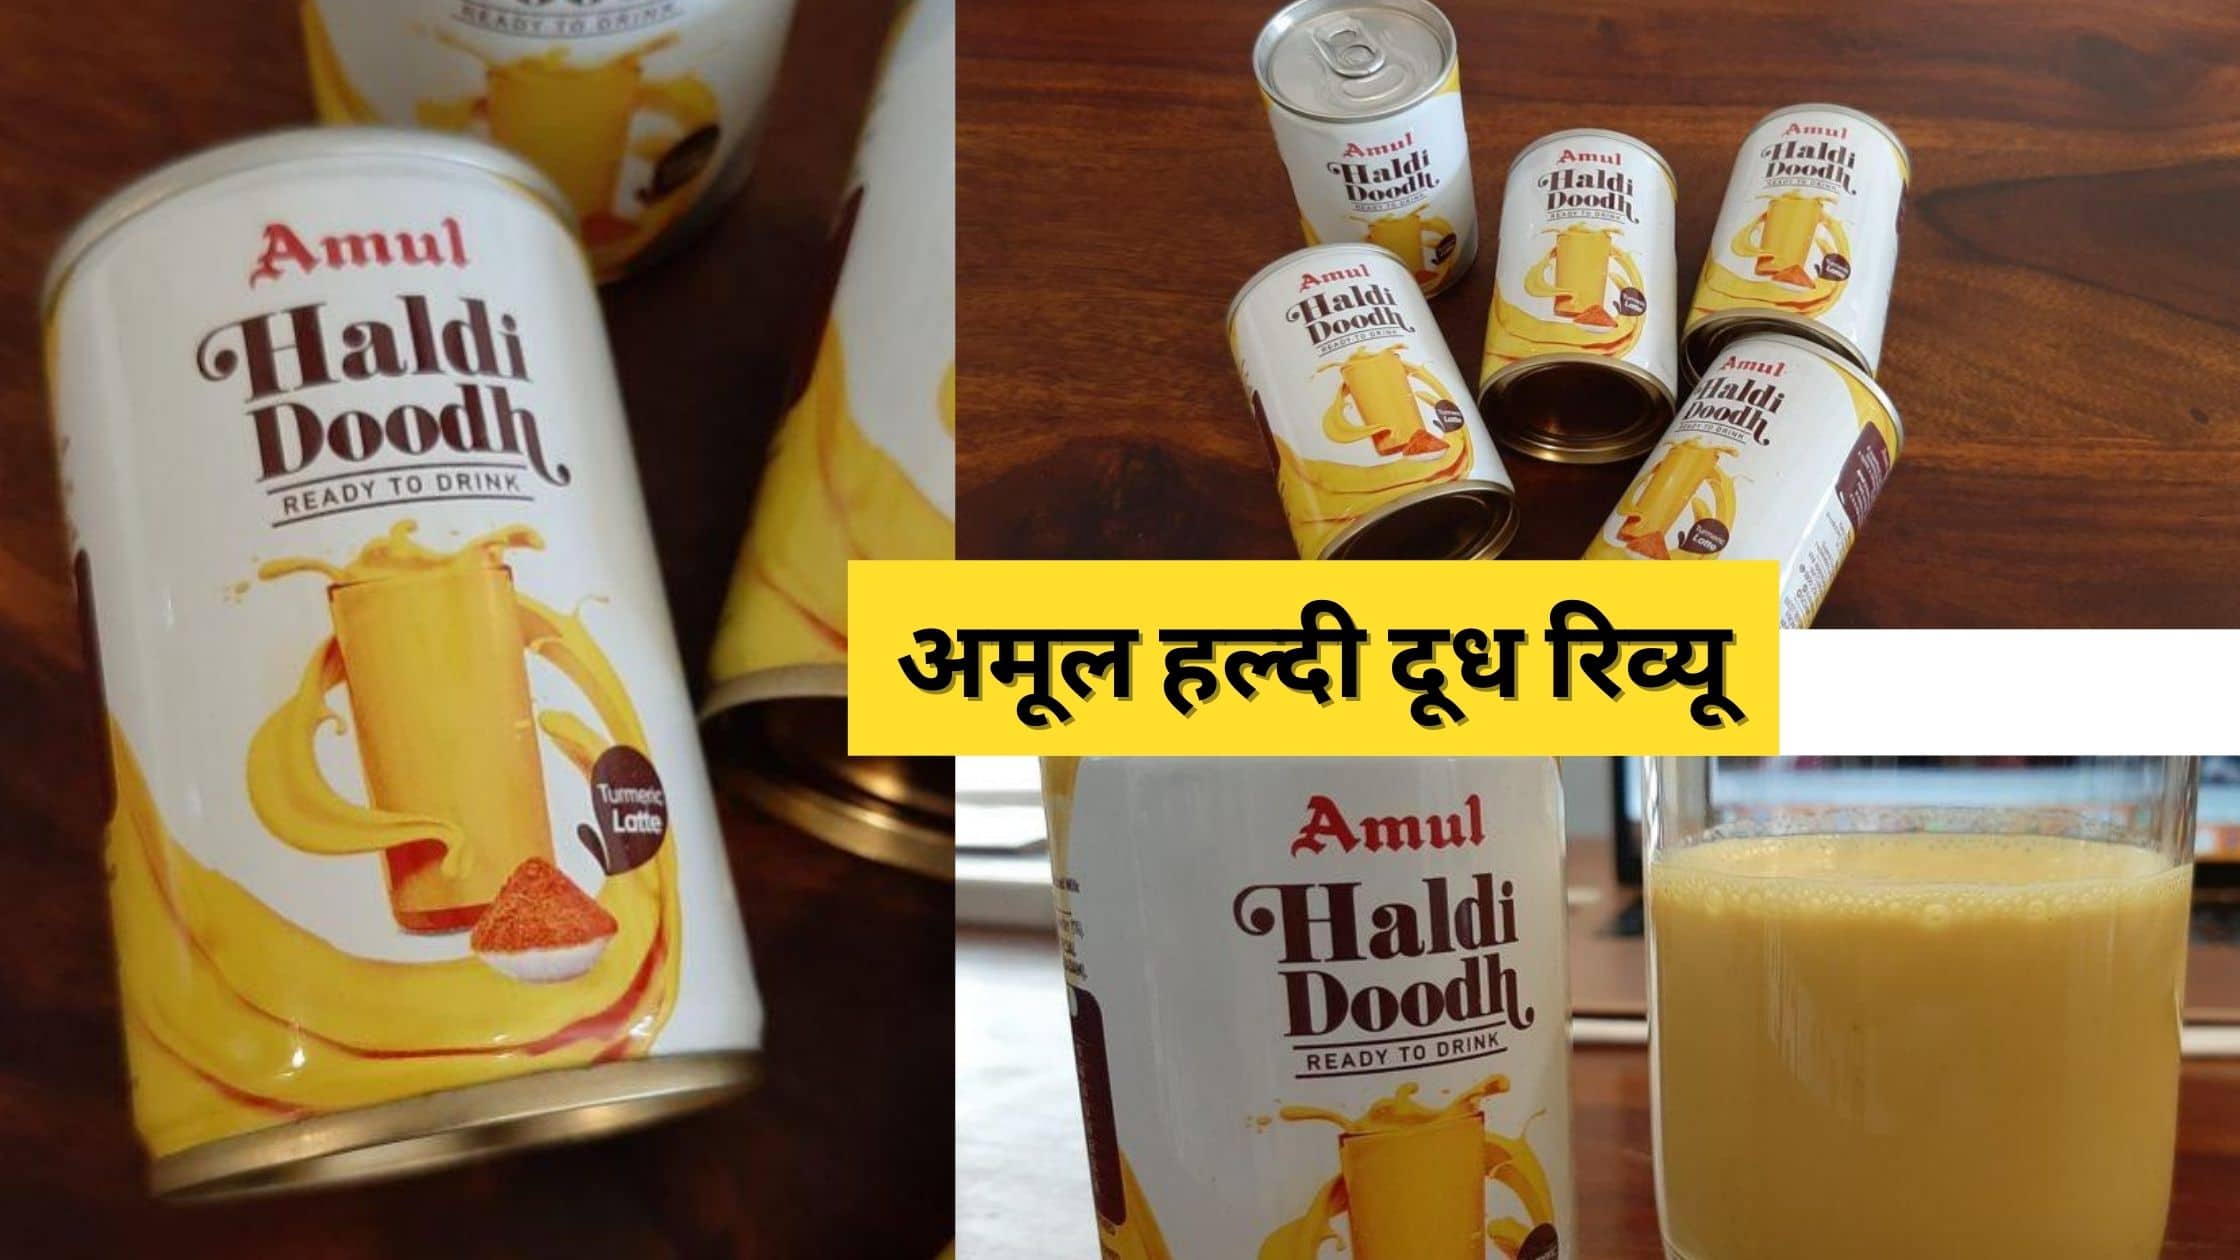 Amul Haldi Doodh Review (Ready To Drink)